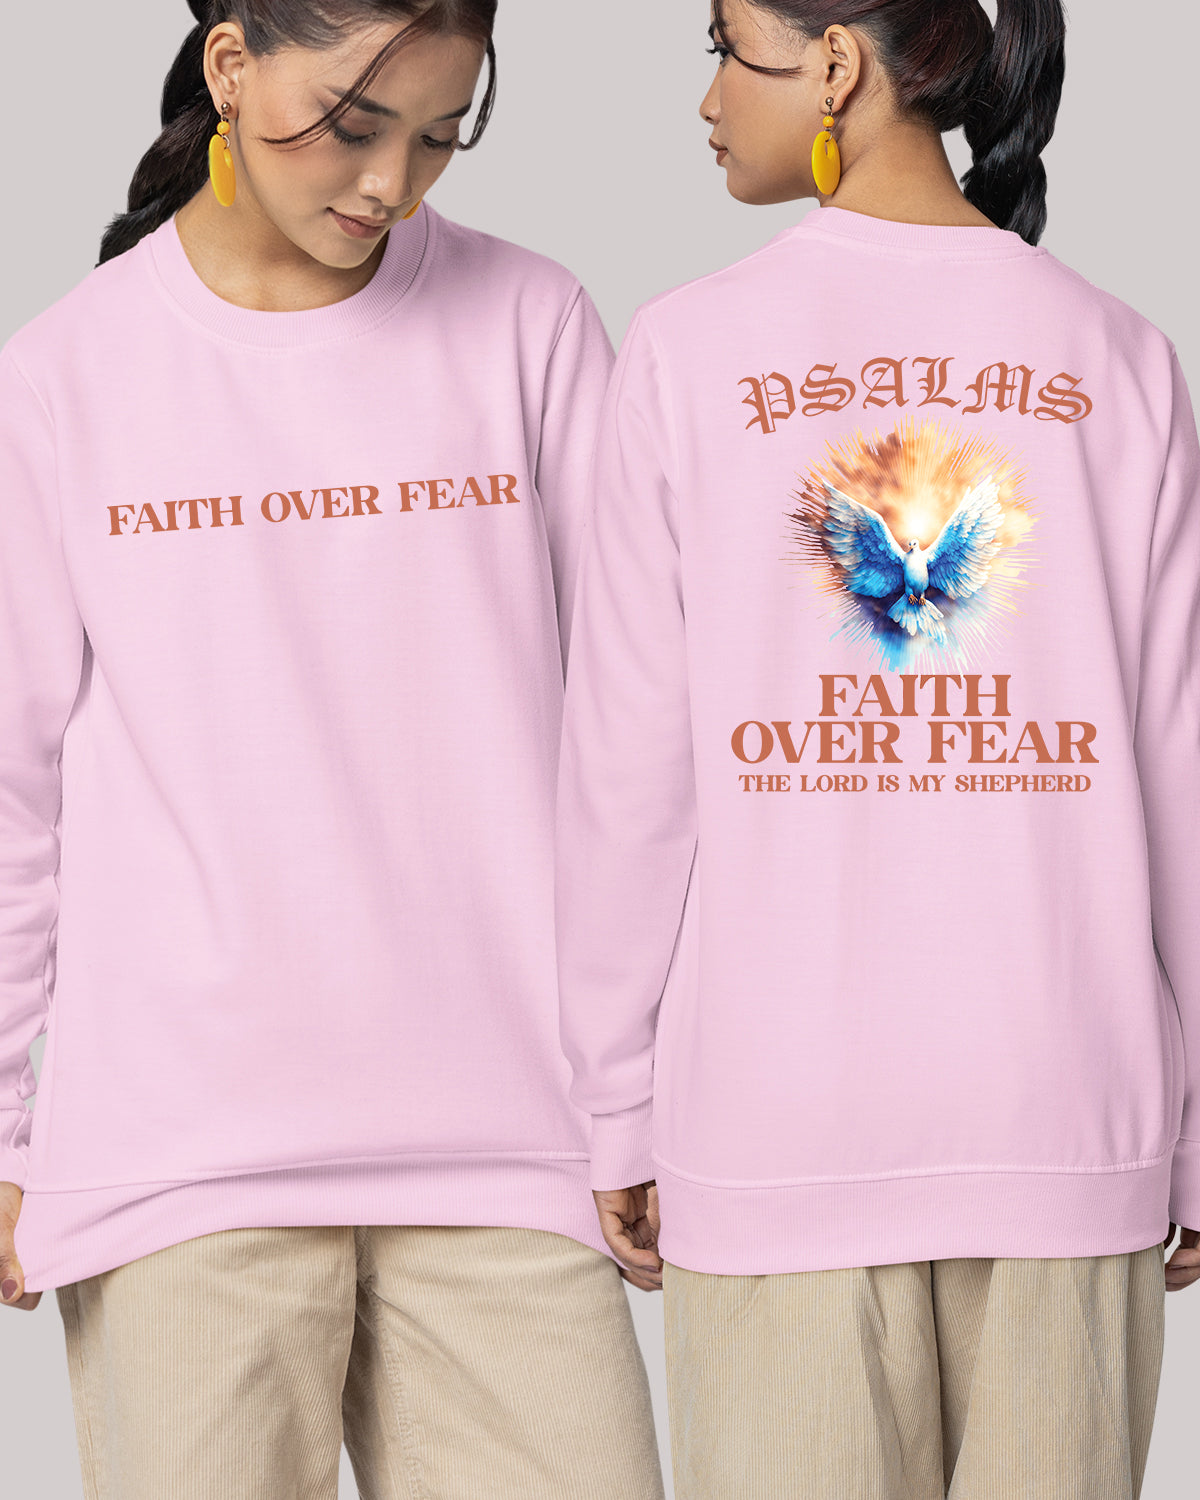 Faith Over fear PSALM Trendy Christian Front Back Vintage Sweatshirts